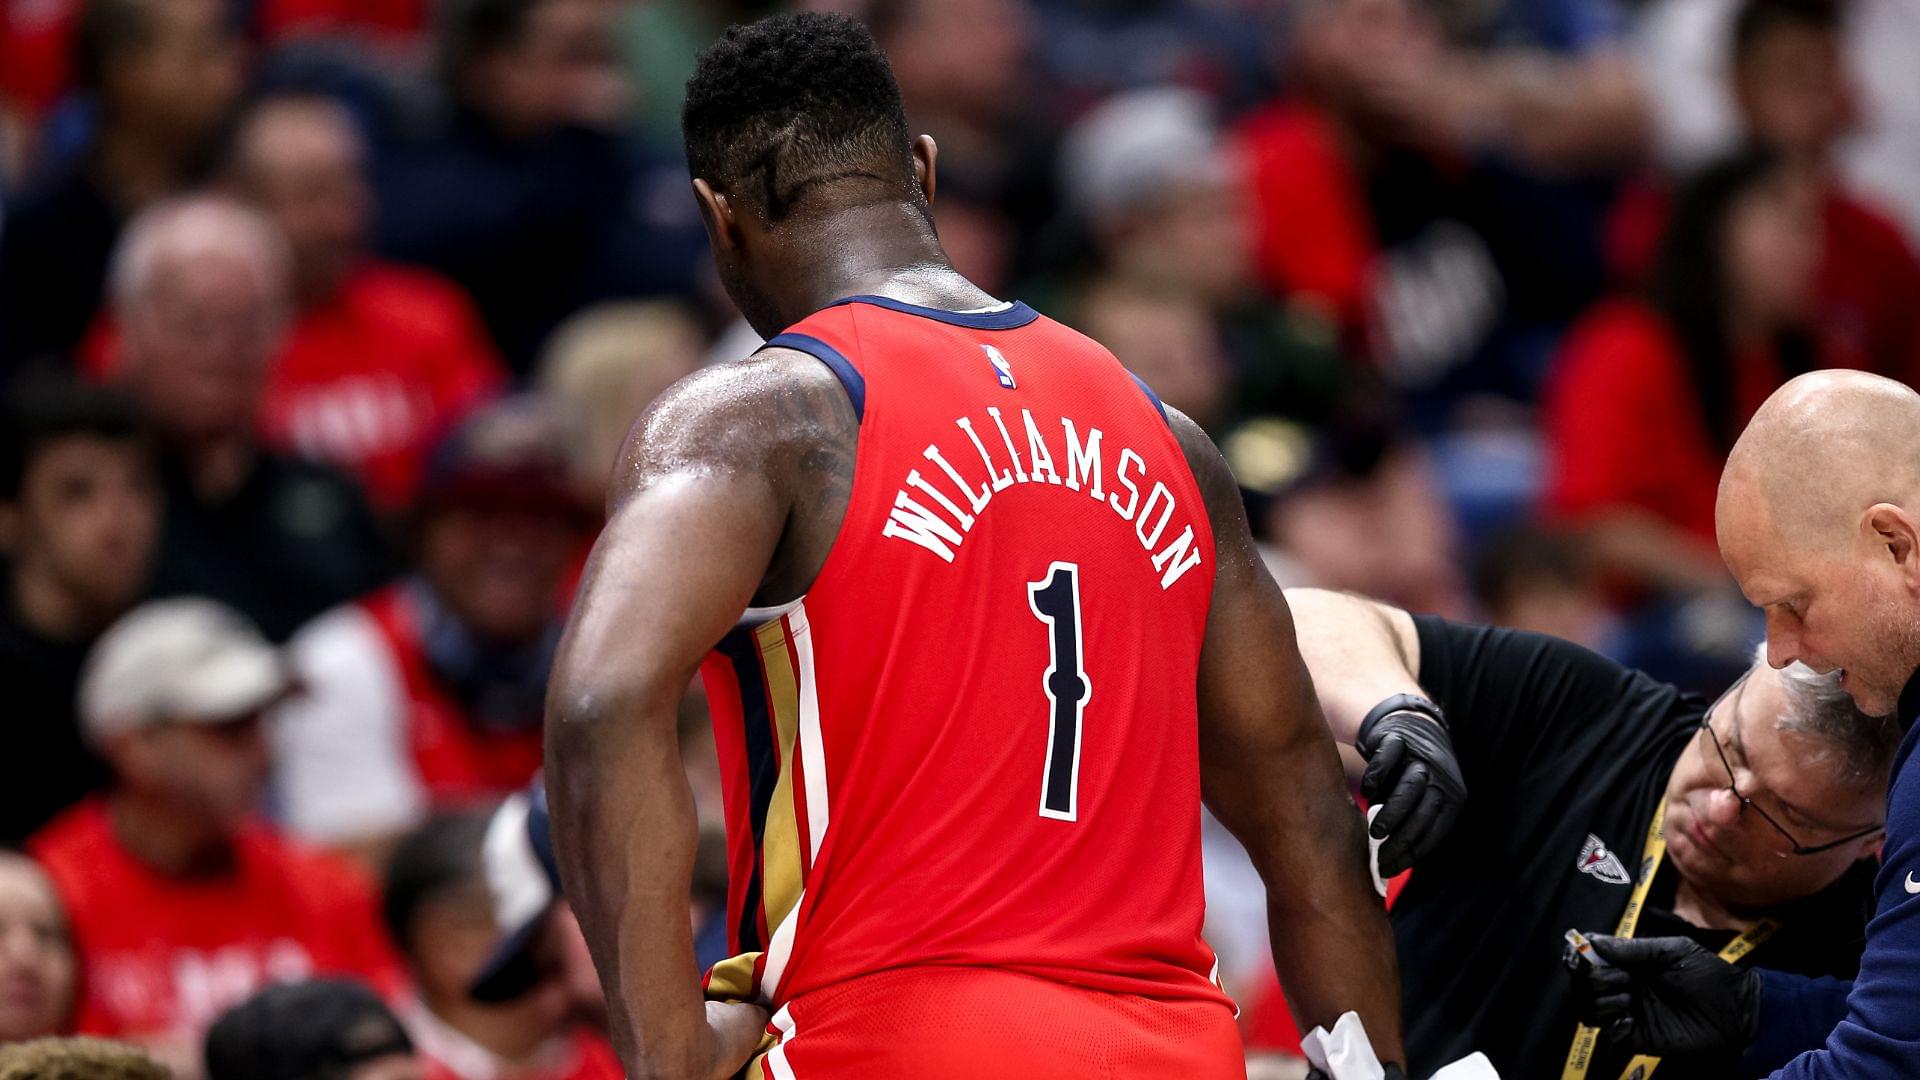 Zion Williamson Continues To Have A Disappointing Injury Status For The Pelicans Ahead Of Game 3 Against The Thunder